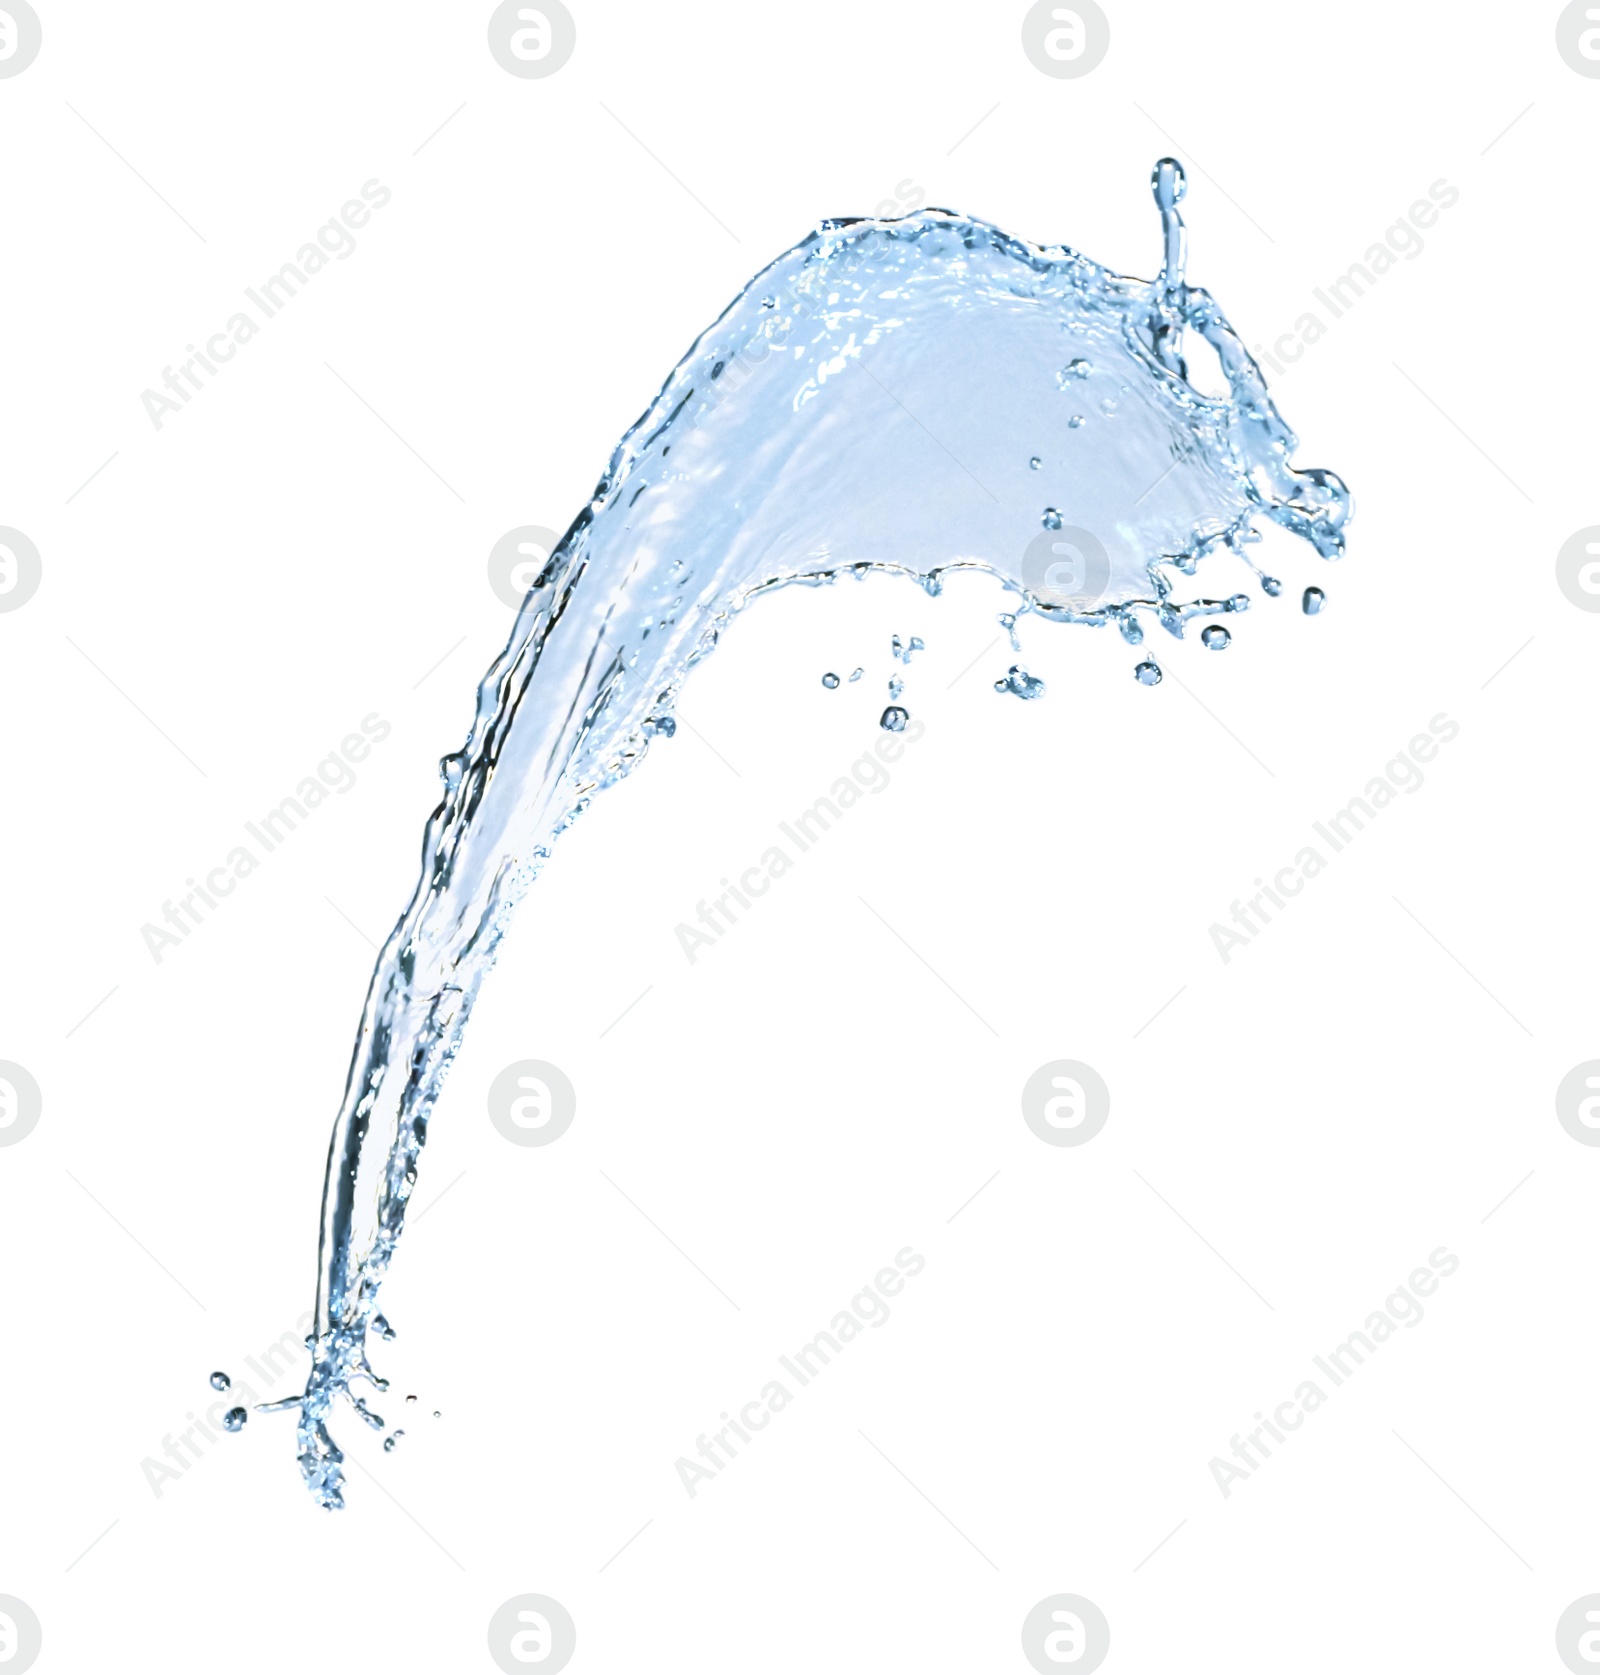 Photo of Splash of clear water isolated on white